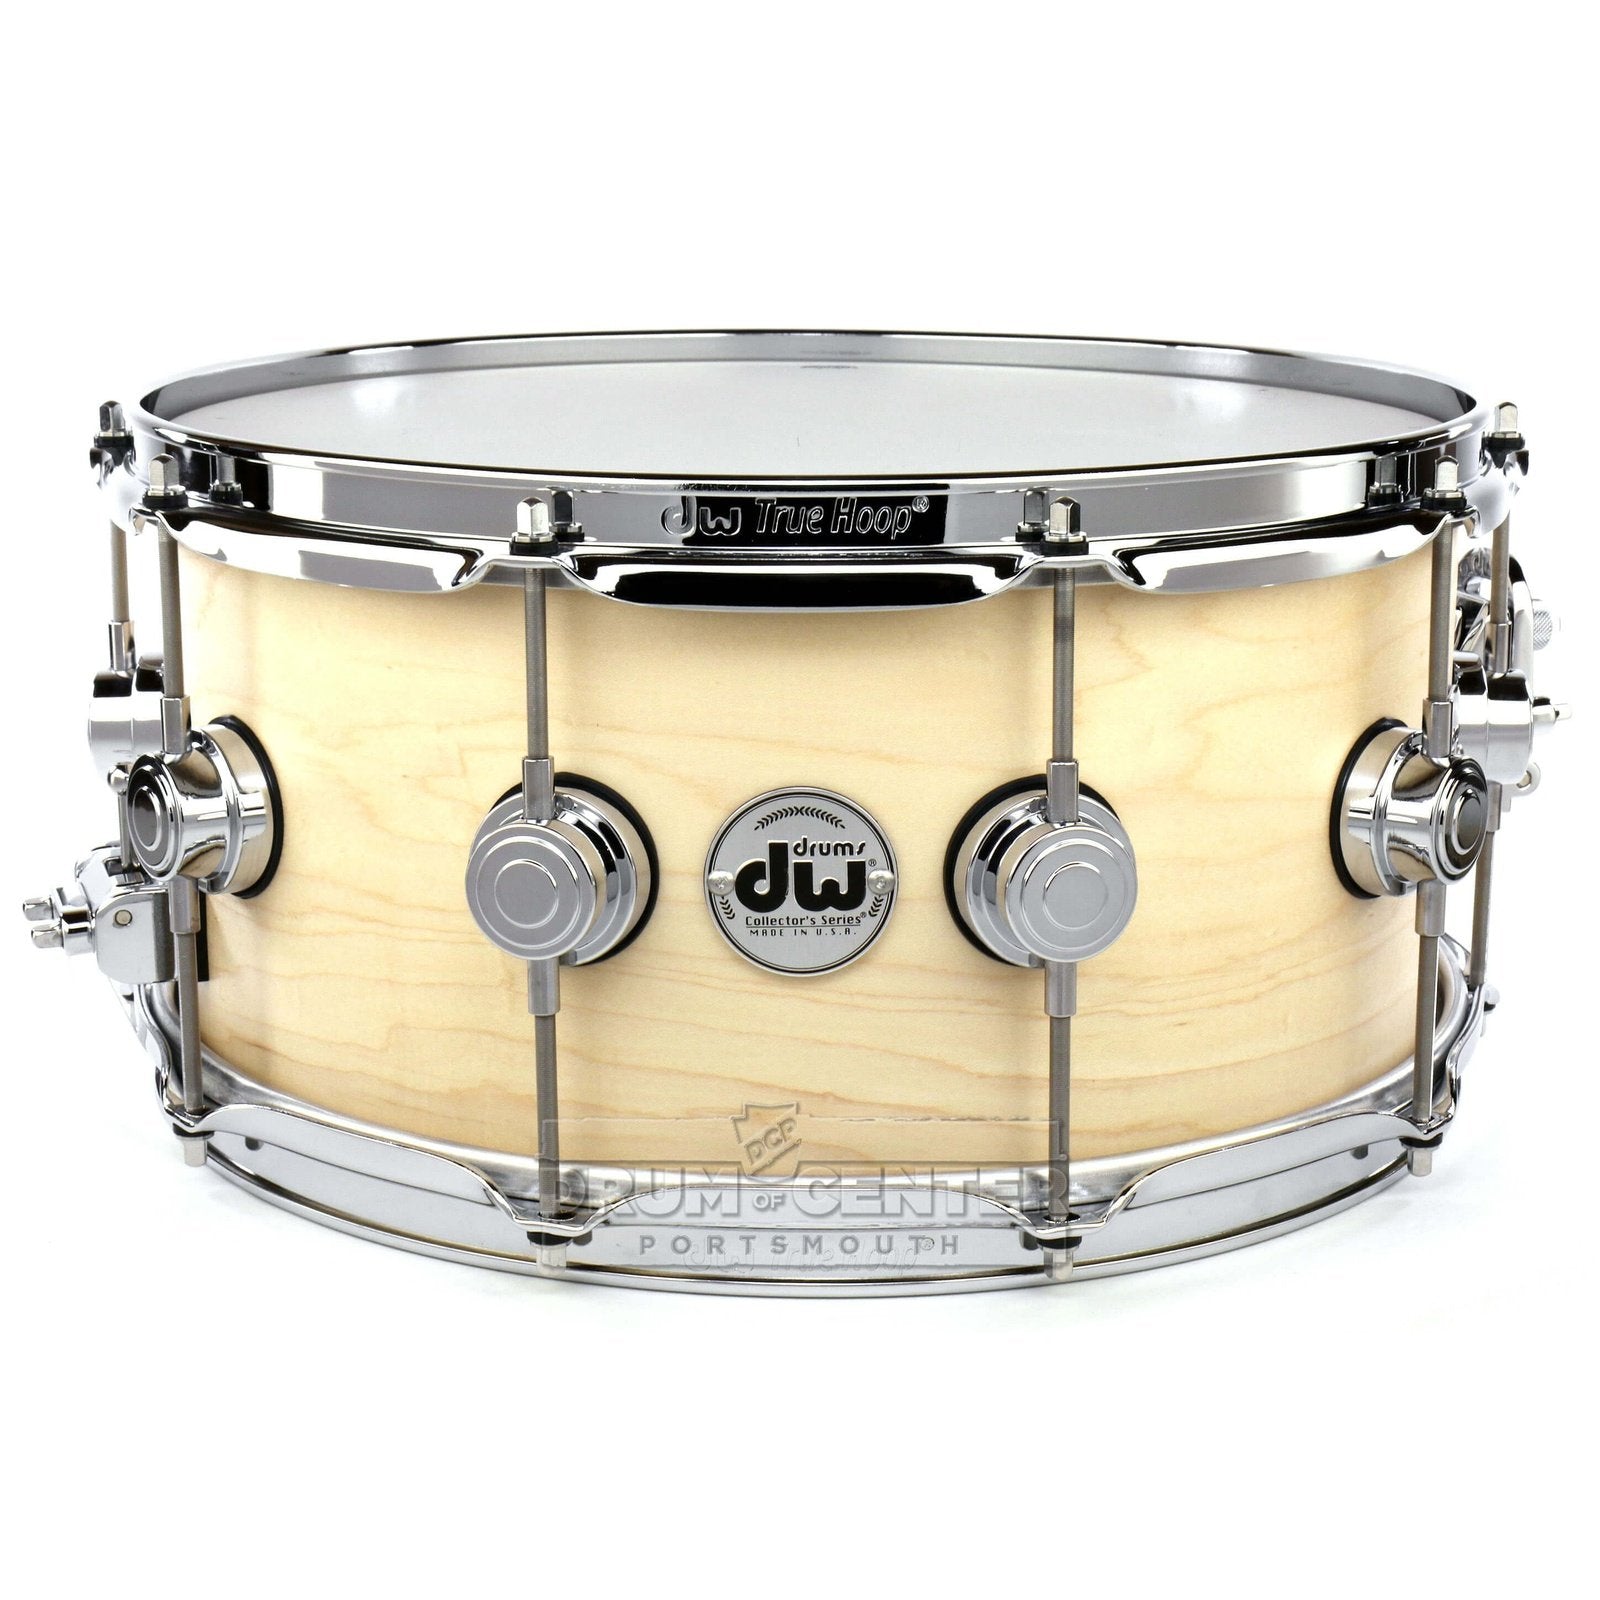 DW Collectors Maple Snare Drum 14x6.5 Satin Natural